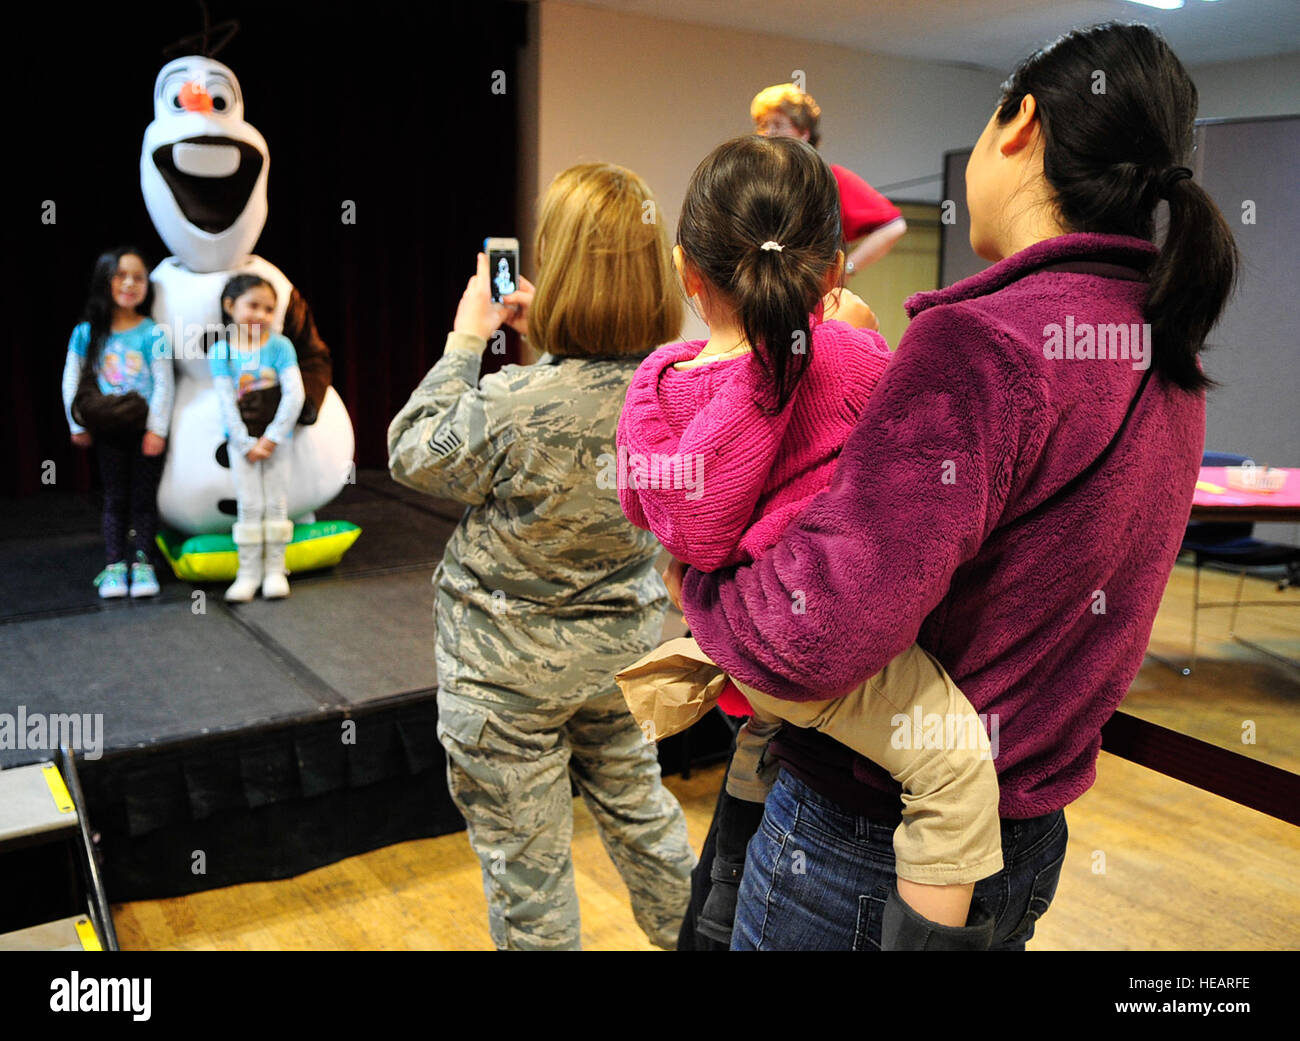 Children and families pose for photos with Olaf during the “Frozen” family event, Jan. 26, 2015 at the Community Center on Ramstein Air Base, Germany. Children and their families had the opportunity to meet one of the movie’s characters, Olaf, as well as make arts and crafts, bounce in the bouncy house and take home balloon animals. Airman 1st Class Larissa Greatwood) Stock Photo